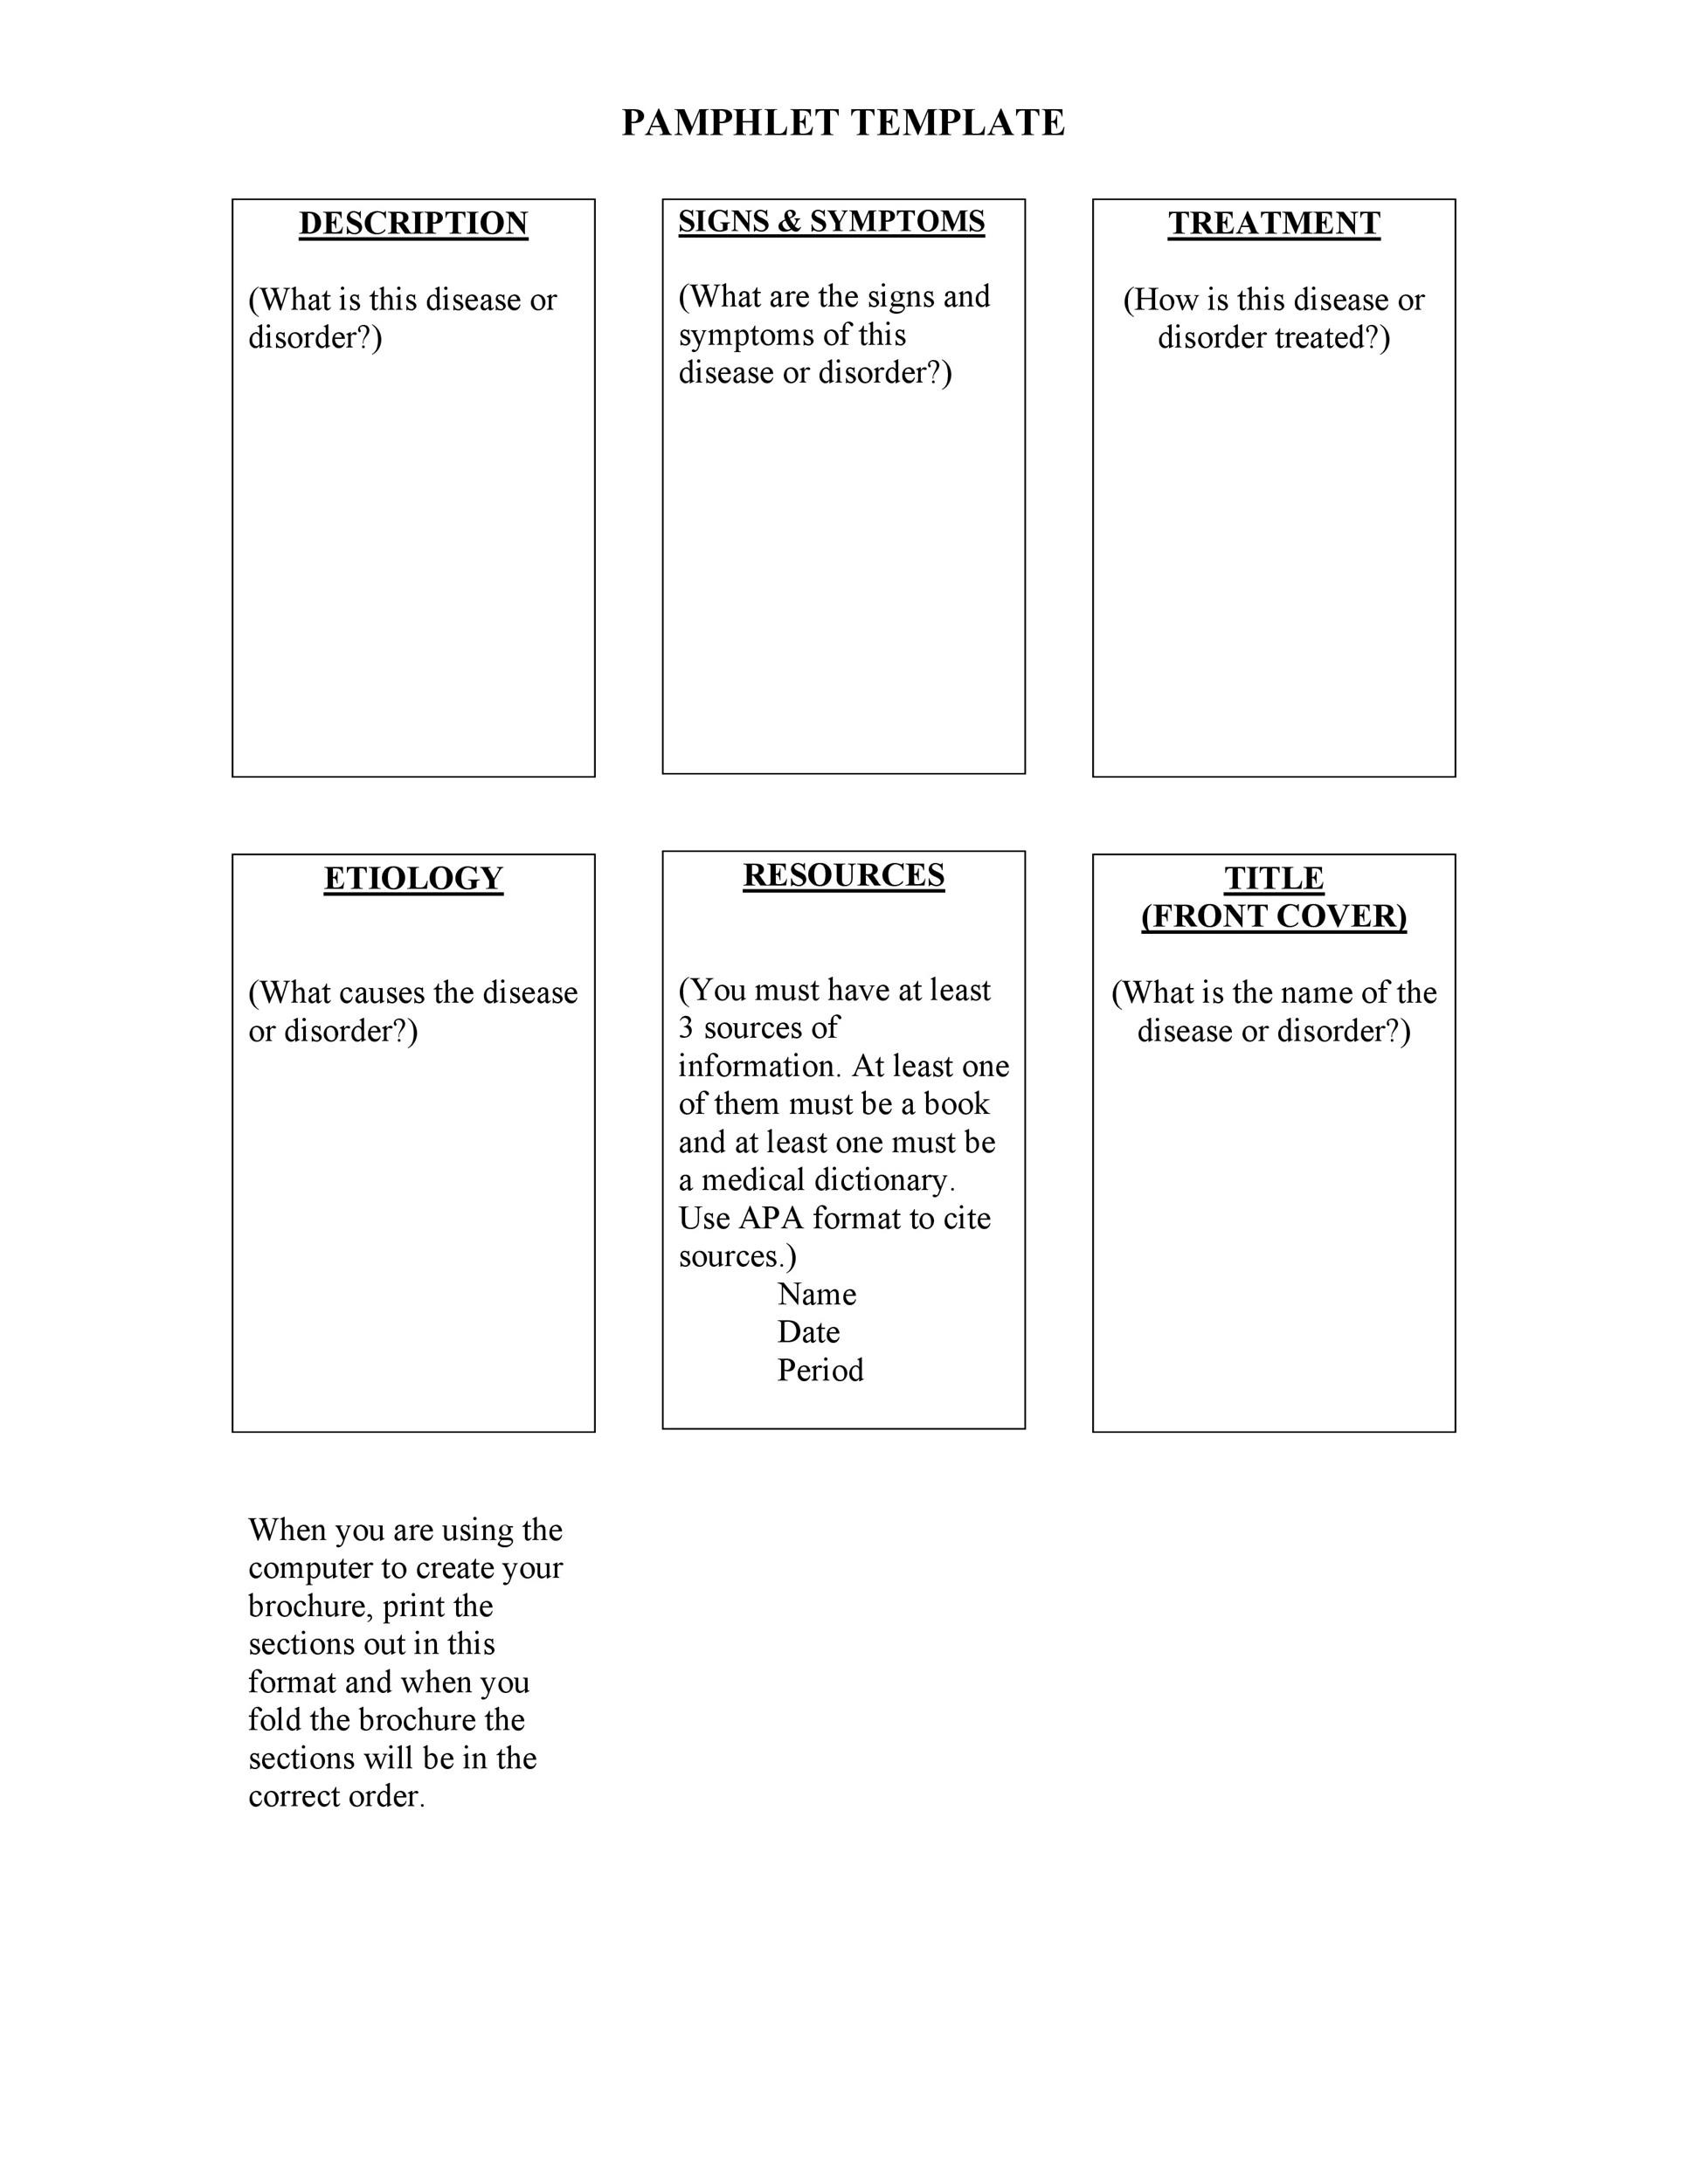 Free pamphlet template 10